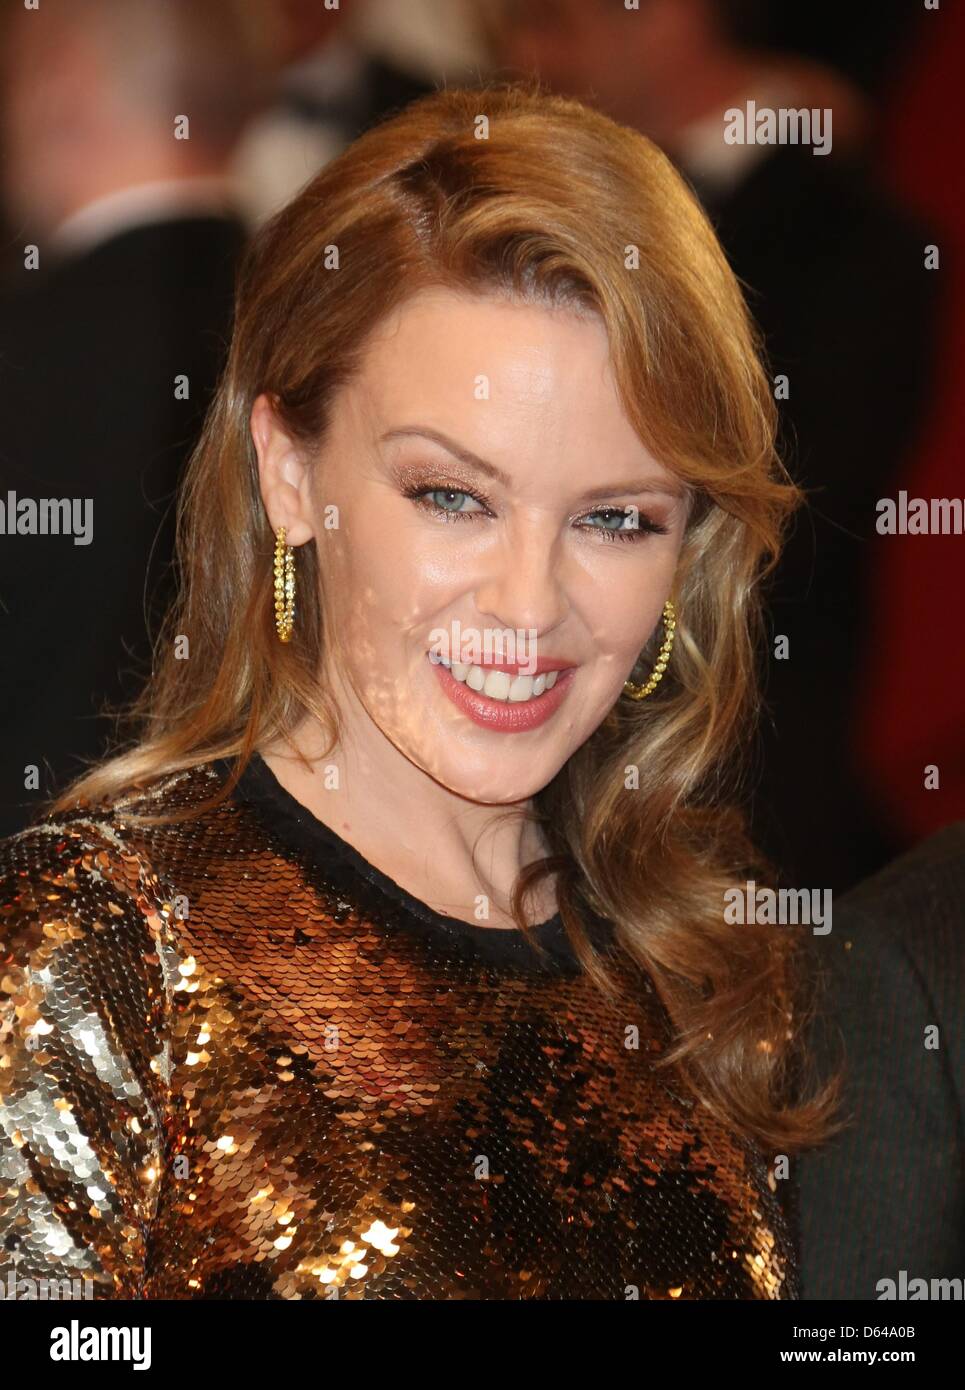 Singer/actress Kylie Minogue arrives at the premiere of 